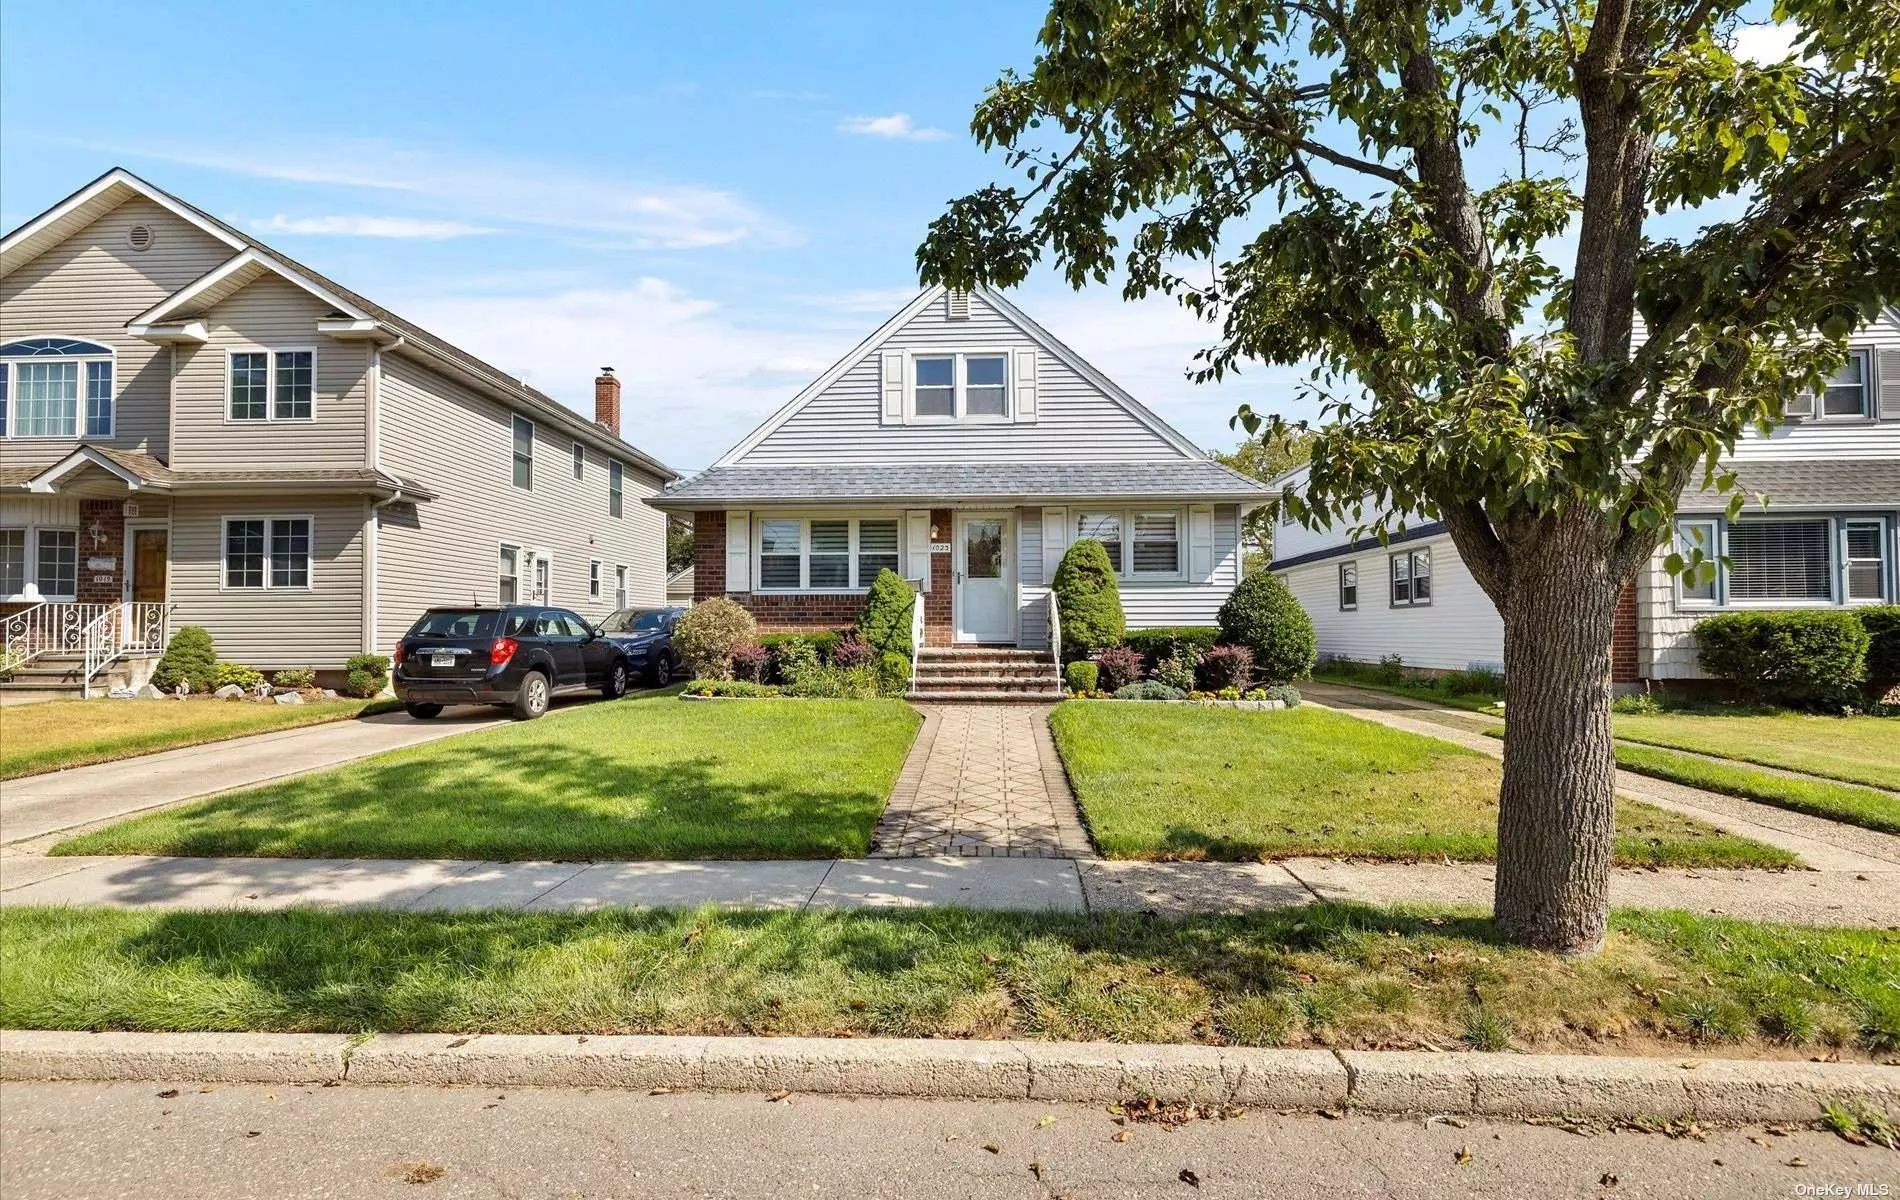 This impeccable Cape features 5 bedrooms, 3 baths, Eat-in-Kitchen, FDR, gleaming hardwood floors, full finished basement w/recreation room, 1644 interior sq ft. close to transportation, shopping, schools and houses of worship.